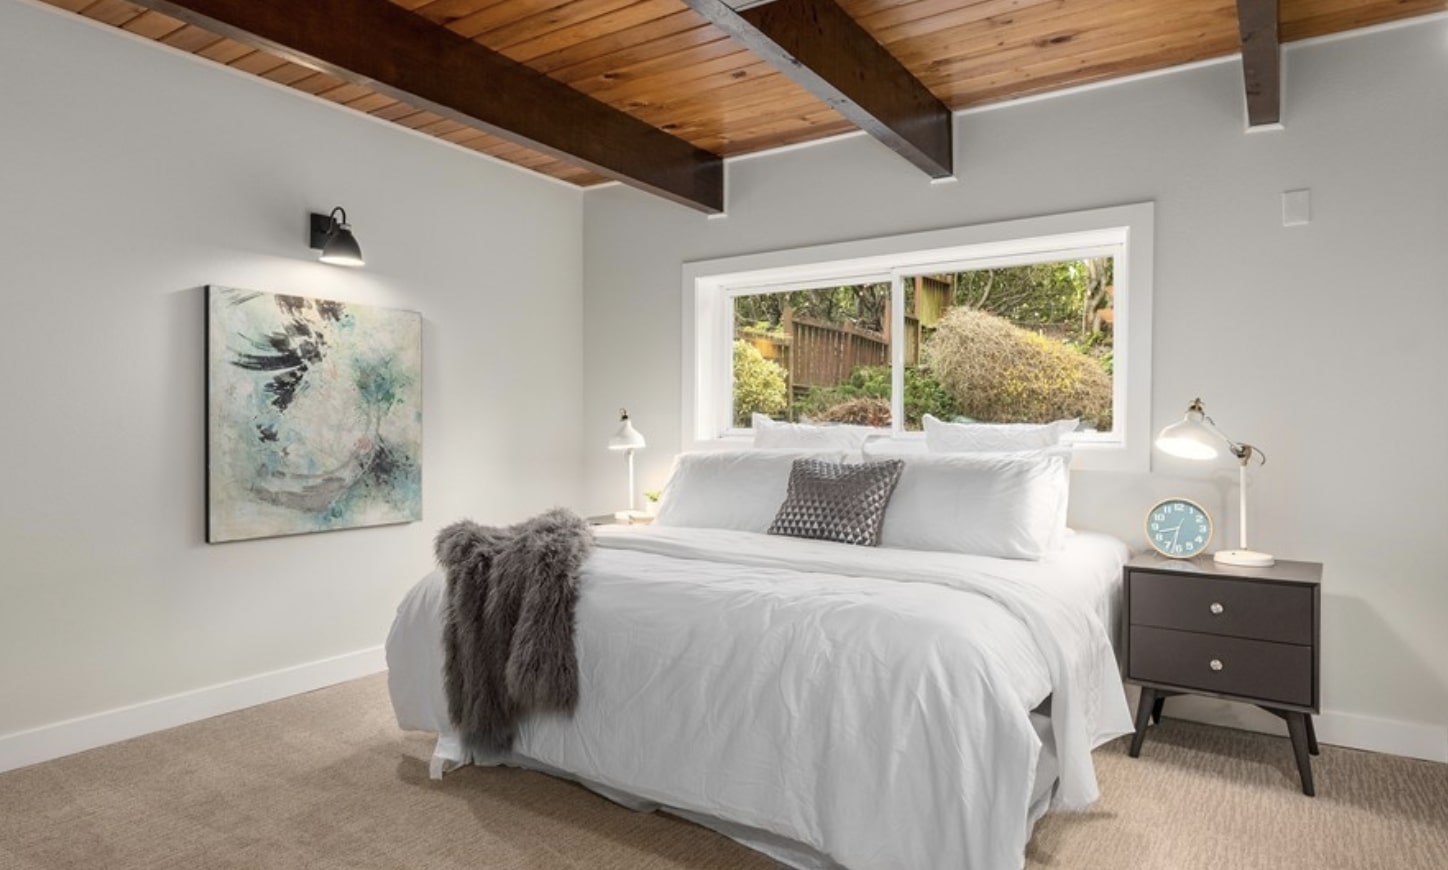 Modern guest suite with shiplap ceiling and wood beams